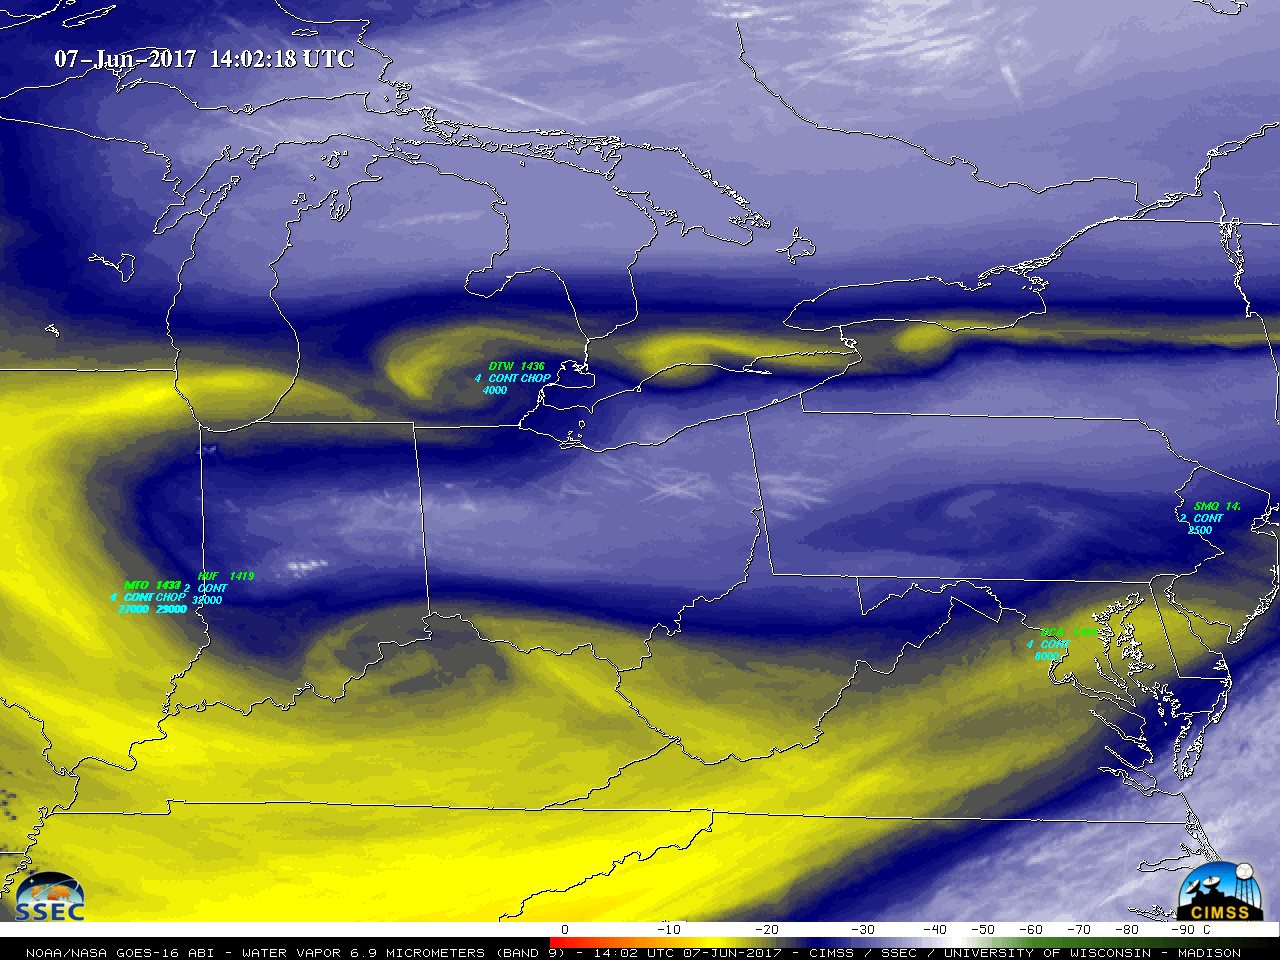 GOES-16 Water Vapor (6.9 µm) images [click to play animation]